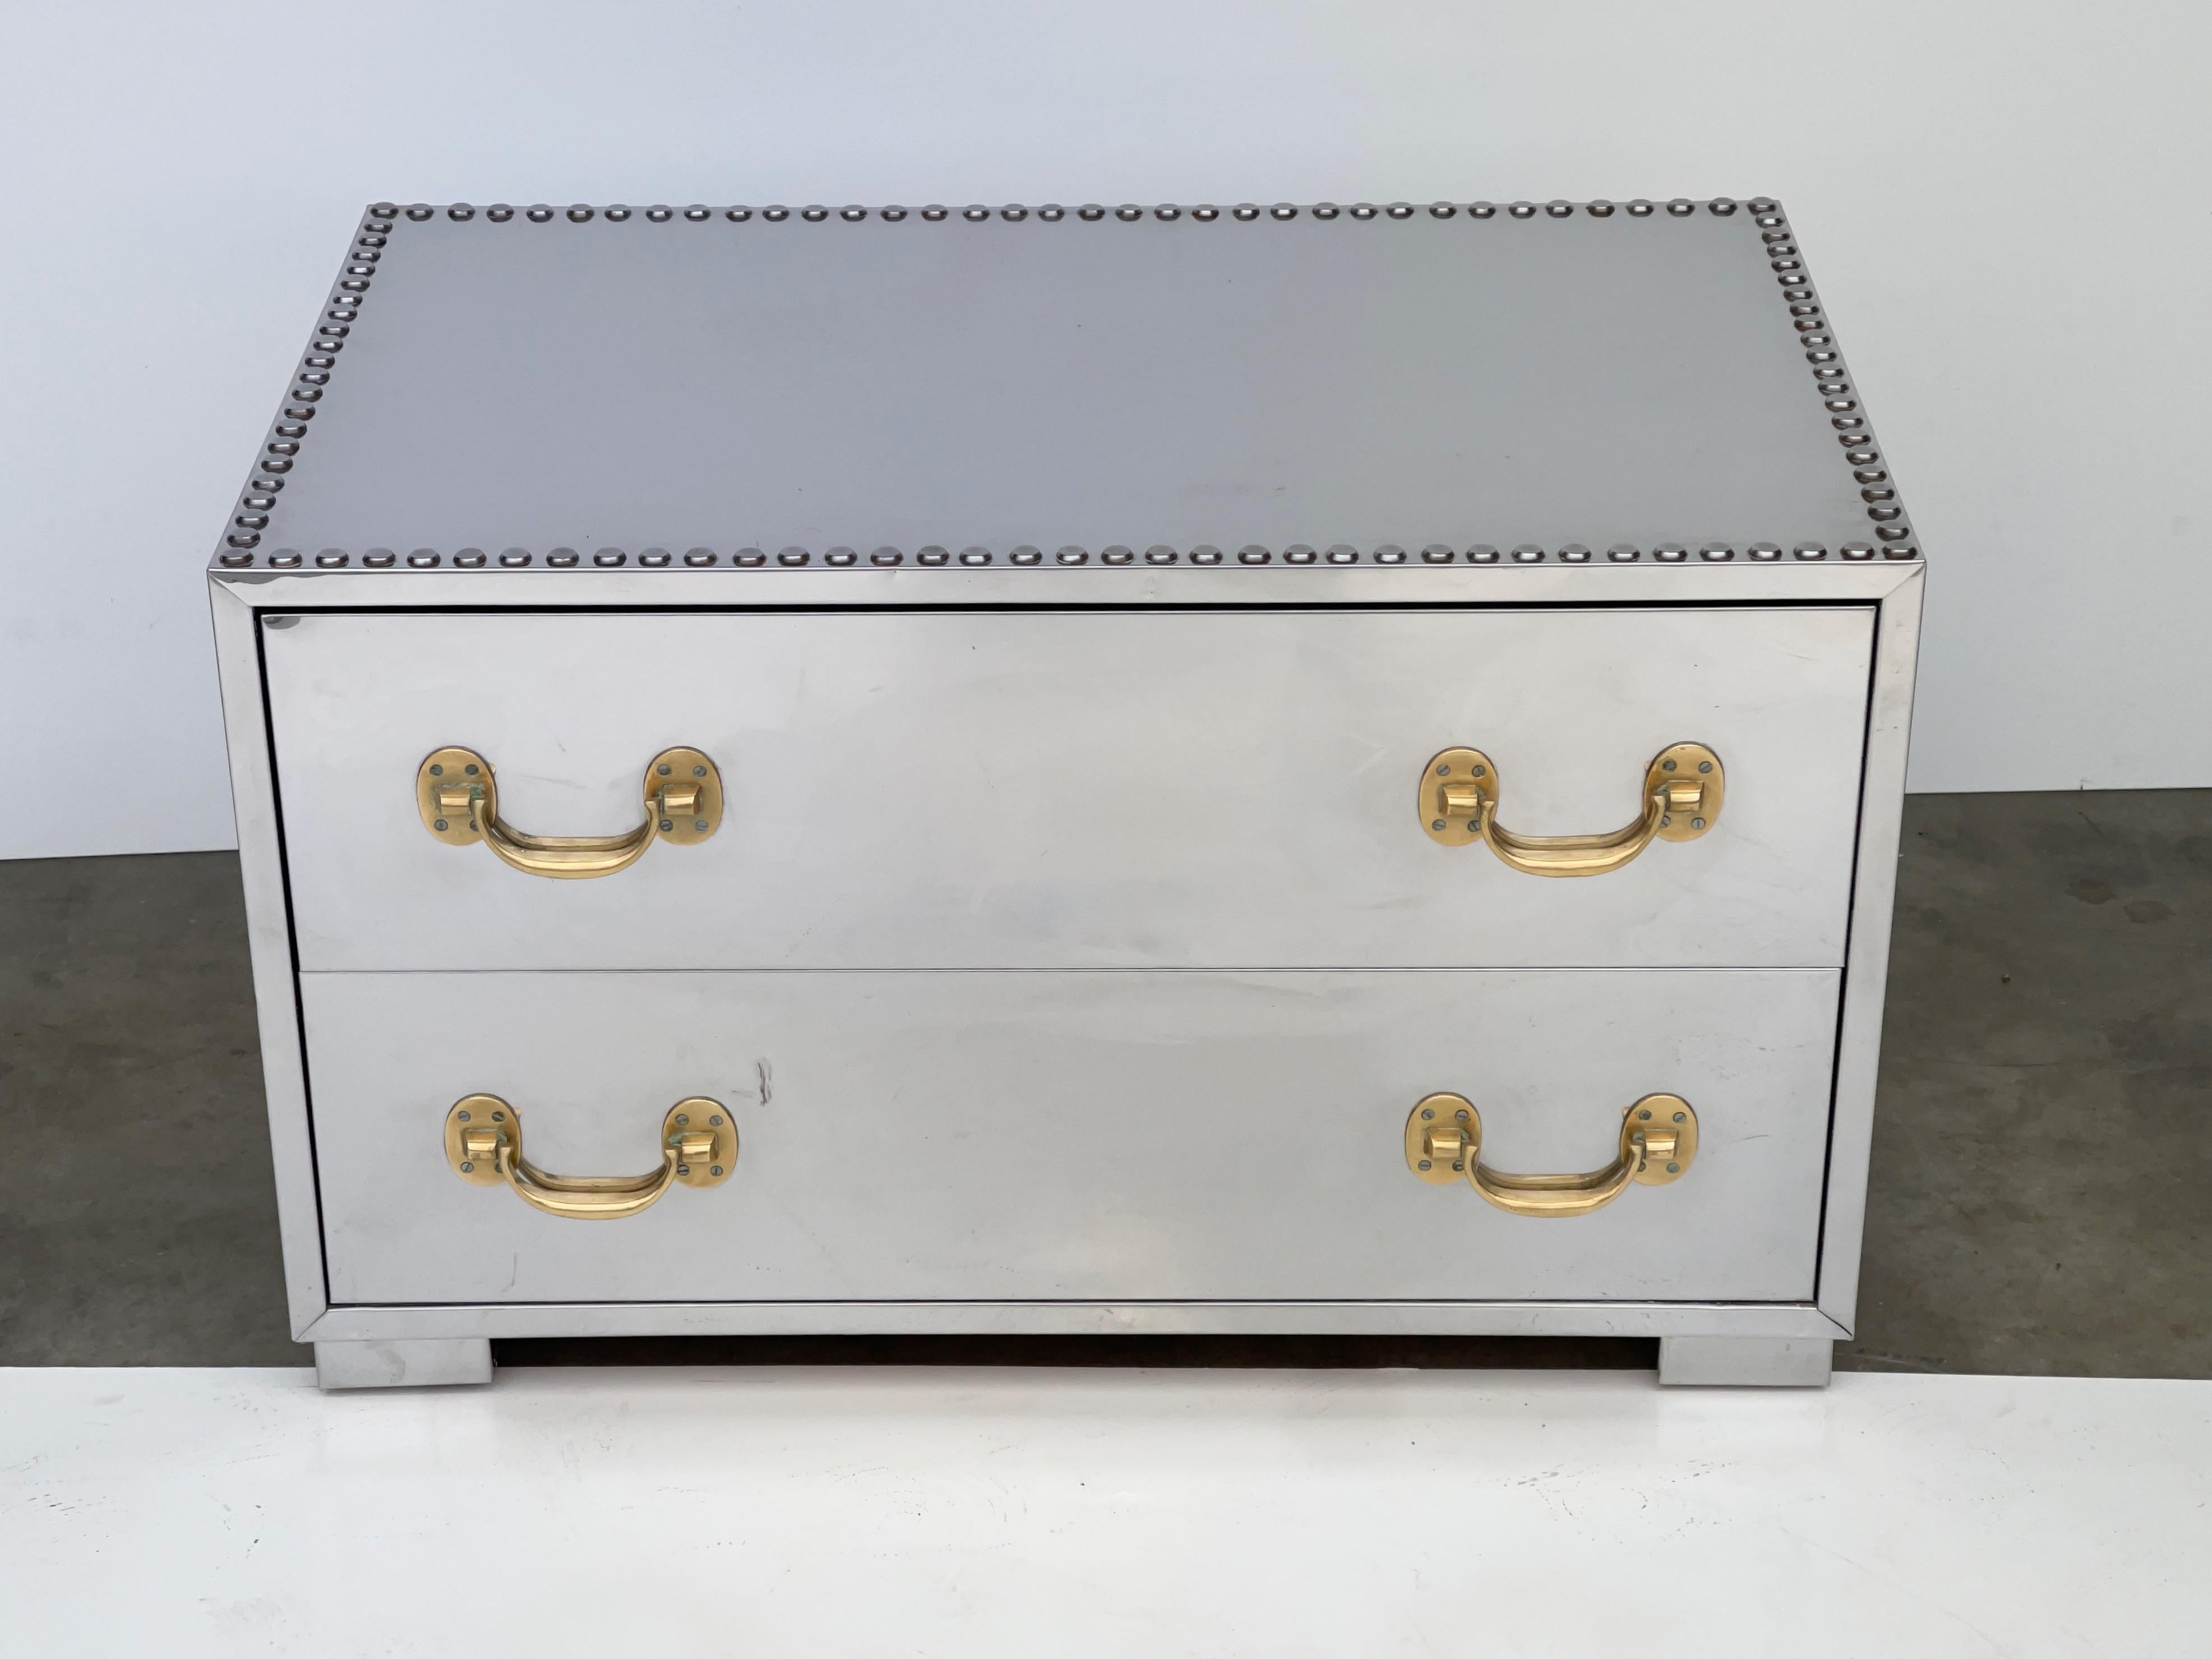 Vintage 1960s mirror polished stainless steel clad Campaign chest of two drawers with solid brass pulls by Sarreid of Spain. Finished on the backside as well for floating within your room. Drawers have red faux-velvet flocking. Top outlined with